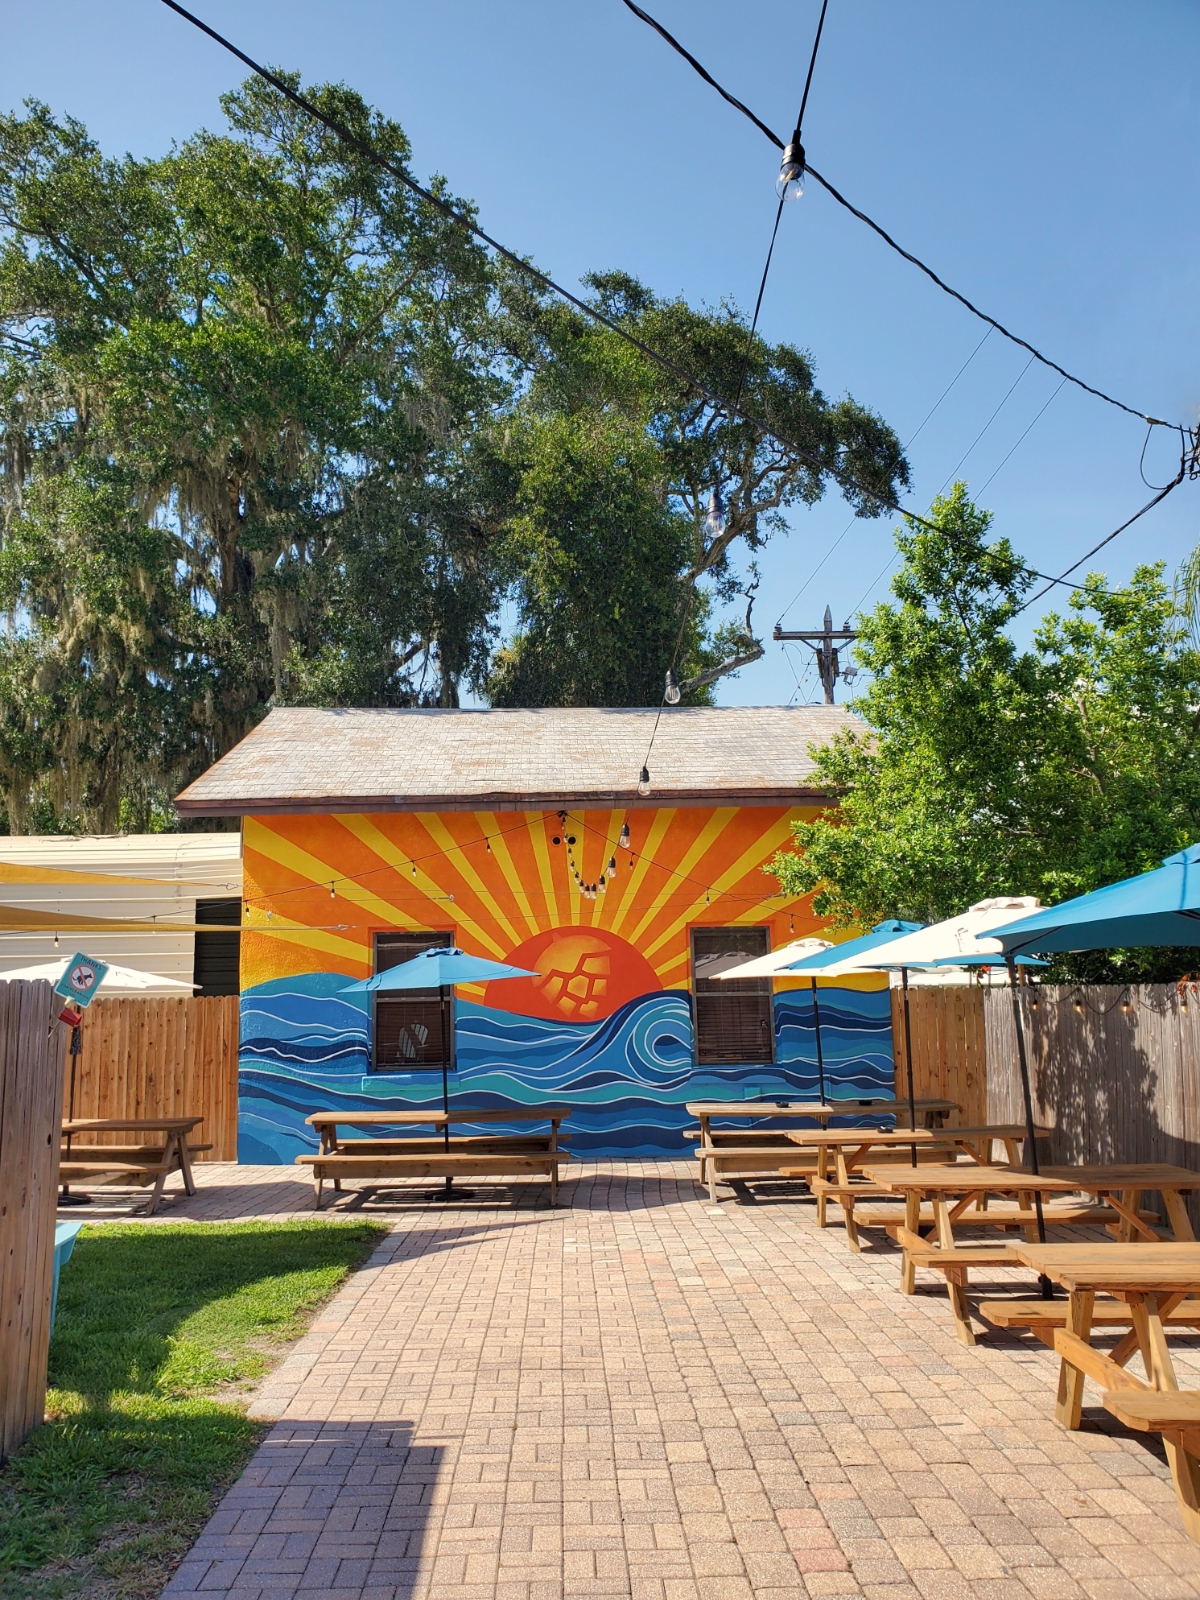 Toll Road Brewing Co. Ocoee Florida, outdoor courtyard and cool mural